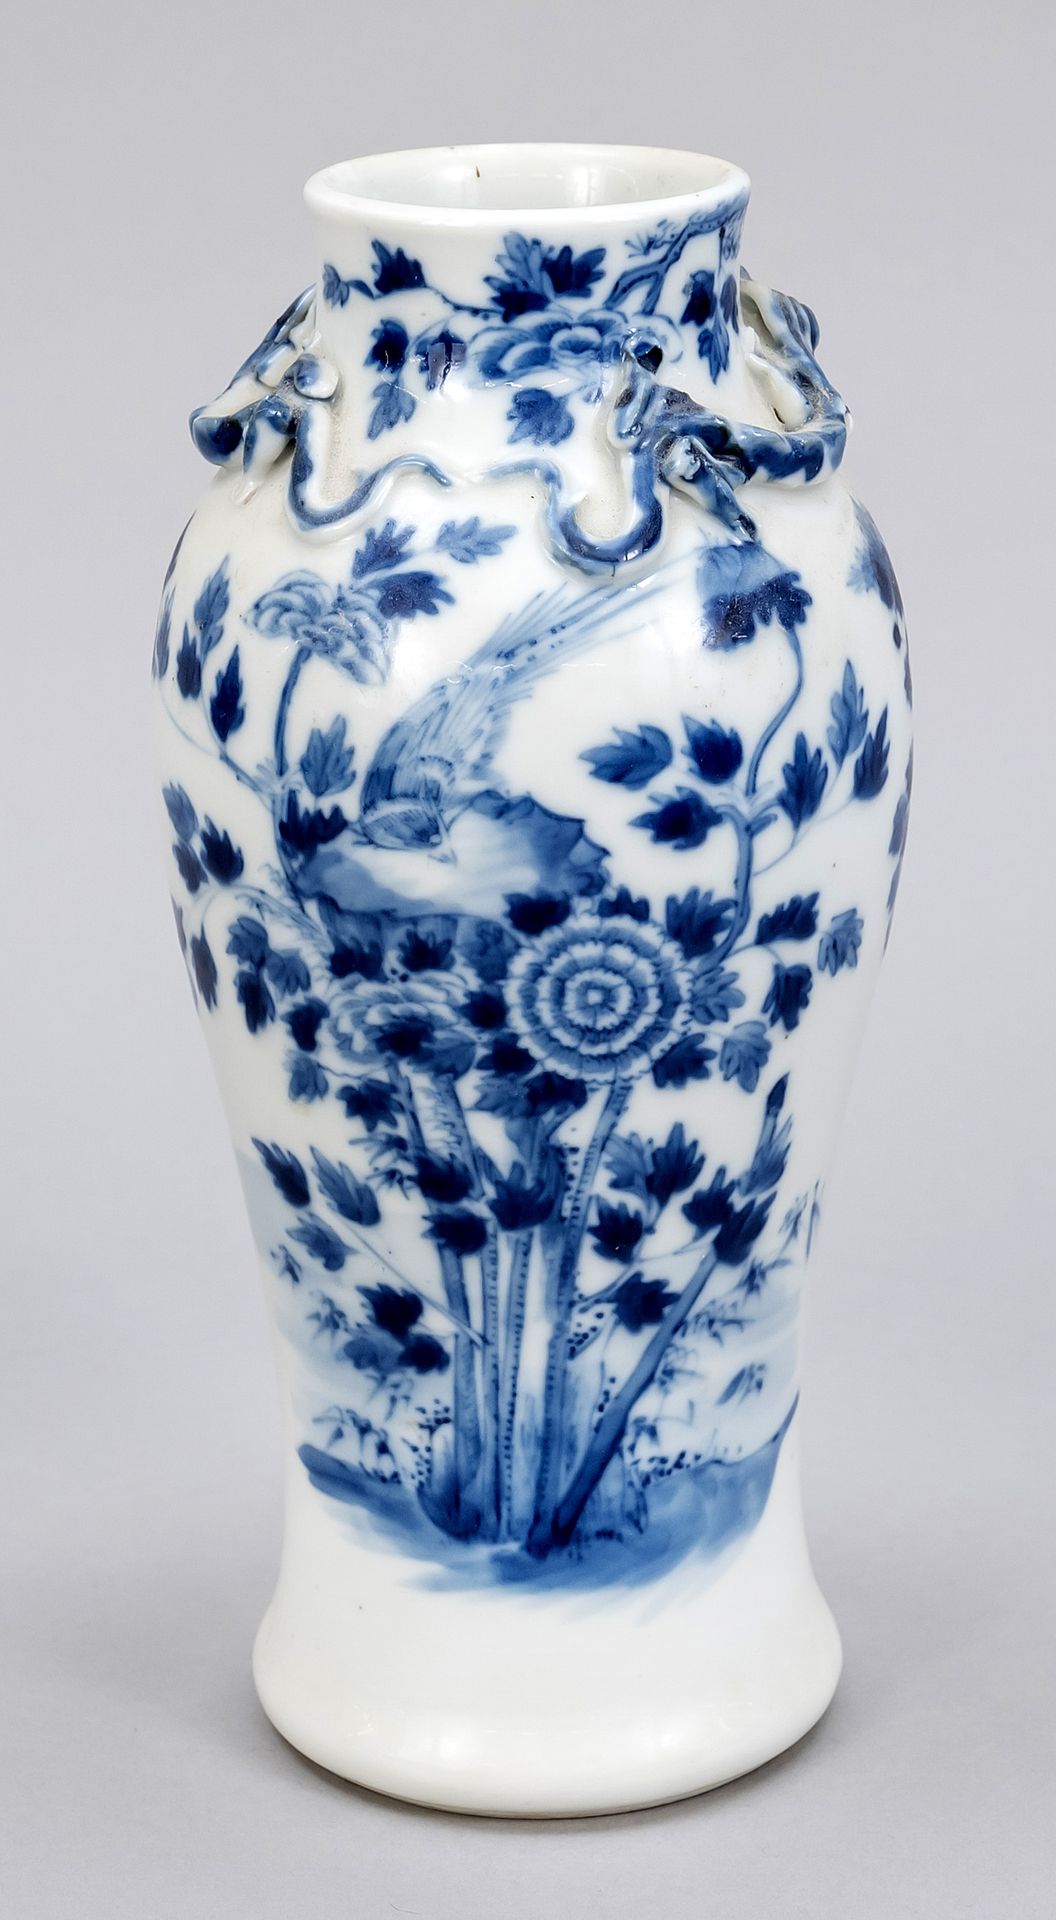 Null Vase with blue and white decoration, China, 17th/18th century (Kangxi/Qing)&hellip;